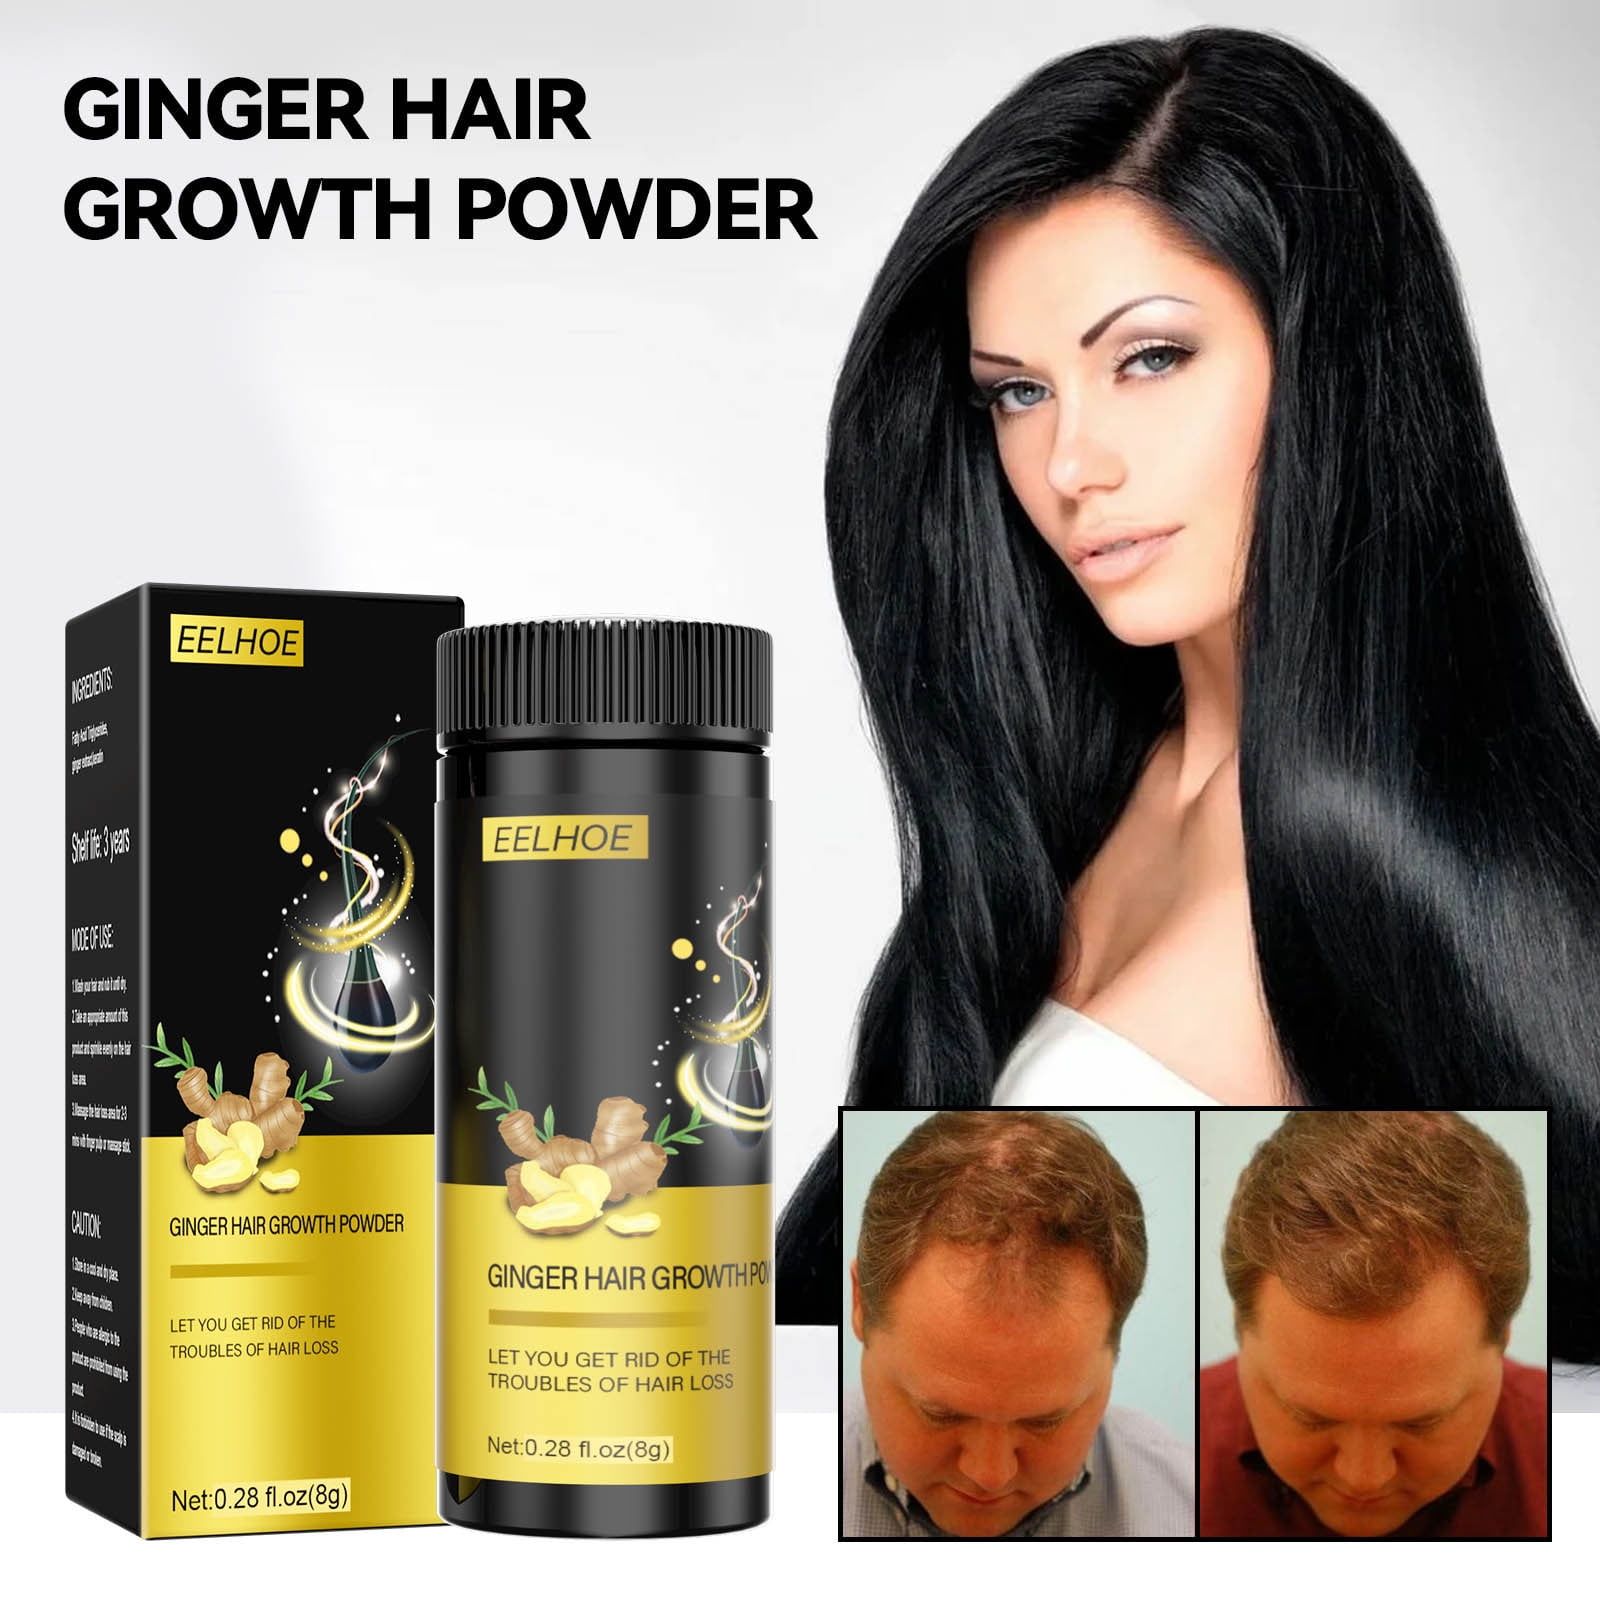 Hair Fibers For Thinning Hair Undetectable & Natural Completely Conceals  Hair Loss In 15 Sec - Hair Thickener & Topper For Fine Hair For Women & Men  